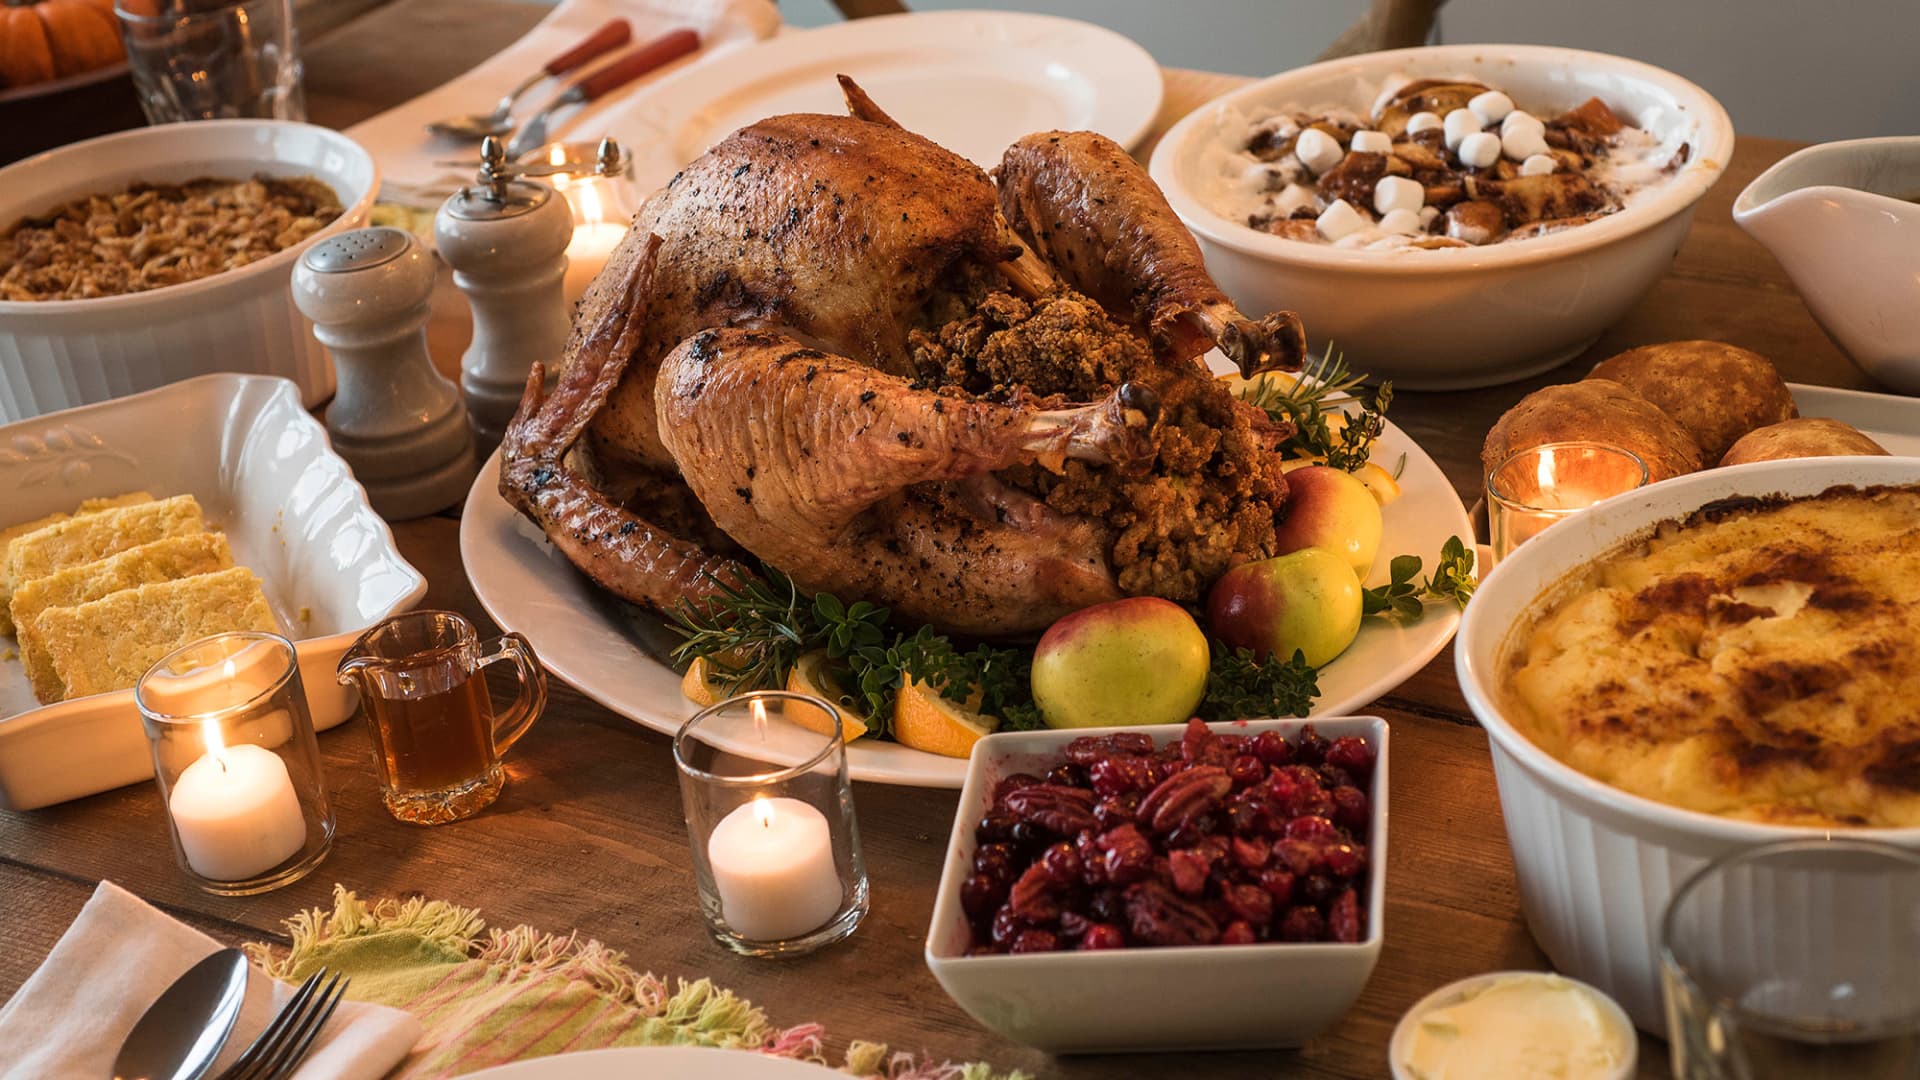 It may be cheaper to eat out on Thanksgiving as grocery prices soar